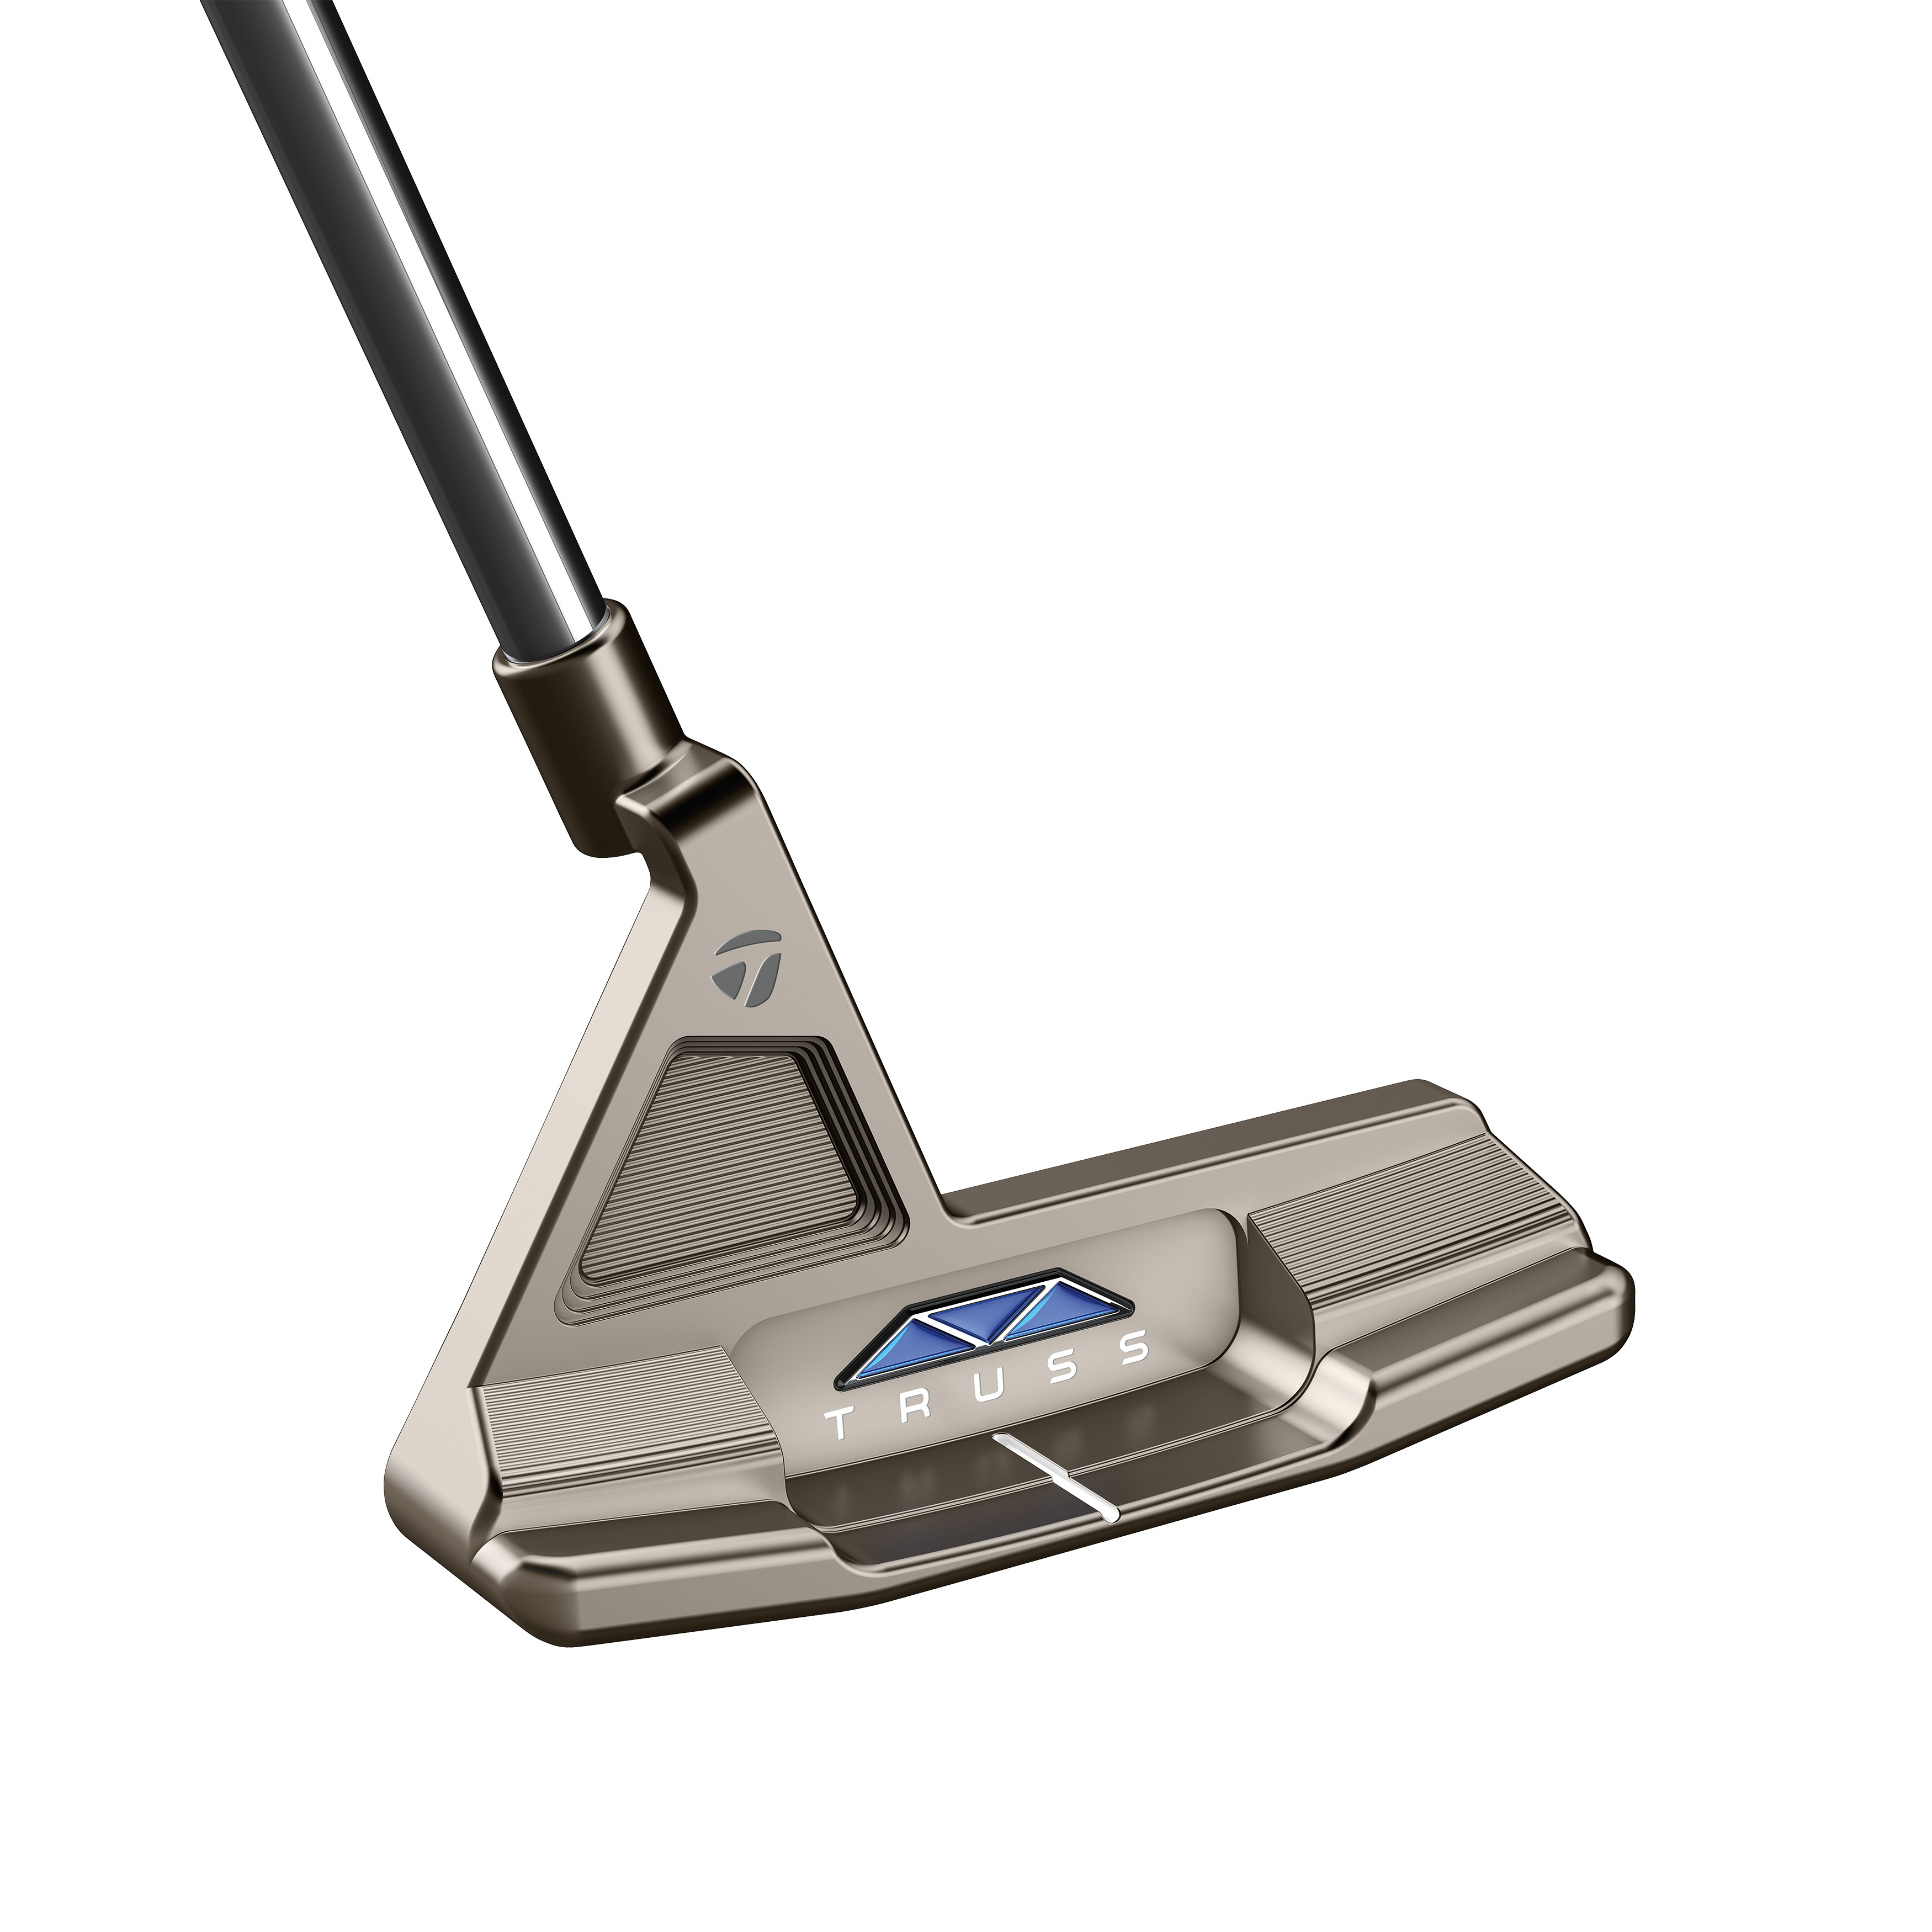 TaylorMade Truss putters - FIRST LOOK 